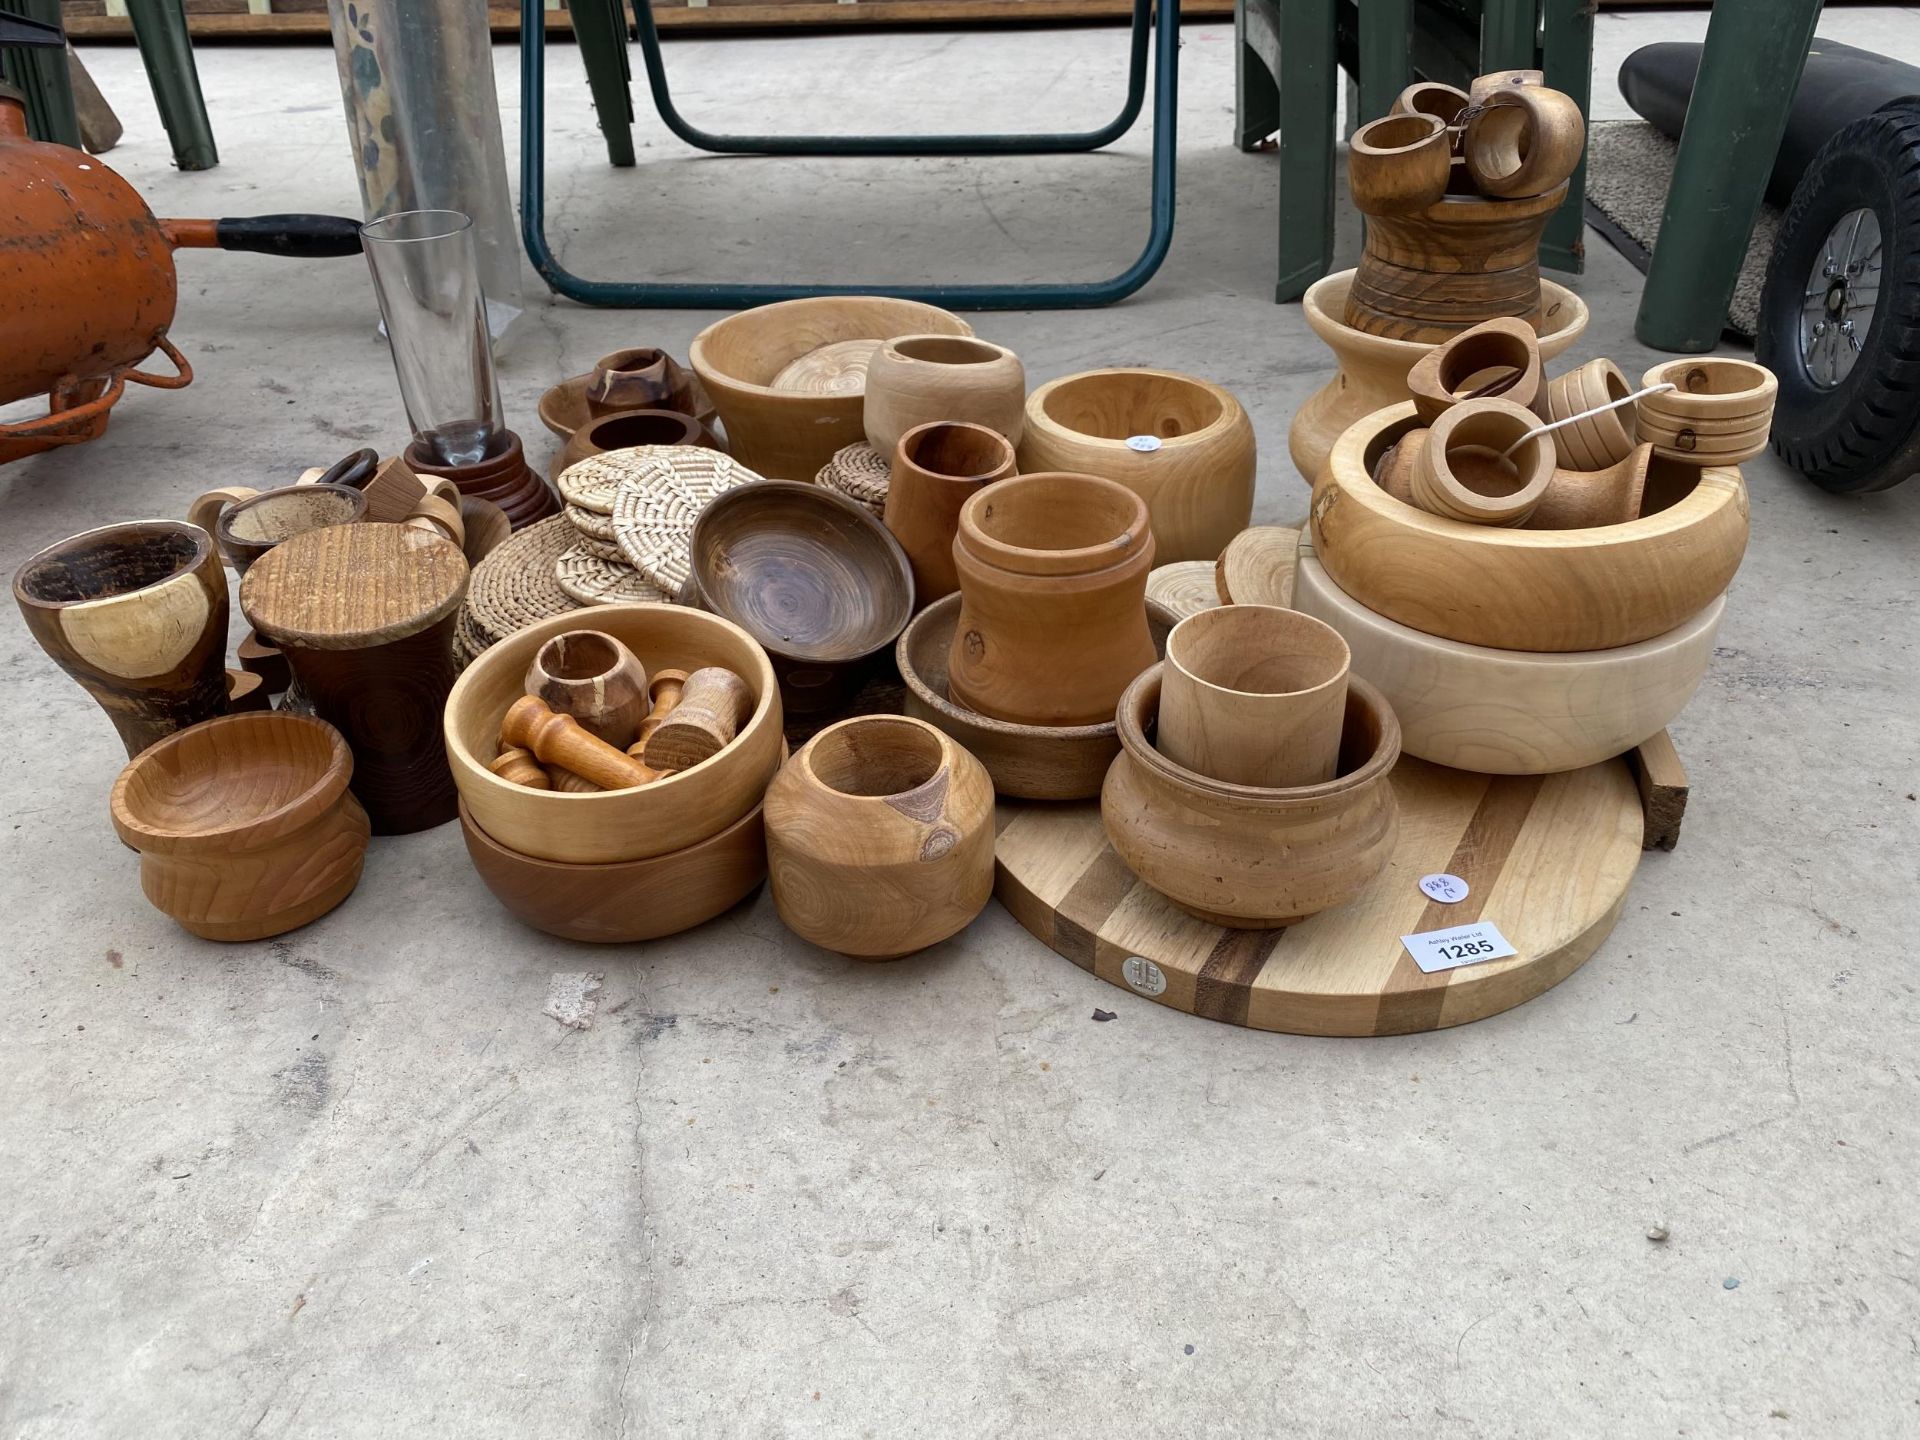 A LARGE ASSORTMENT OF TURNED TREEN ITEMS TO INCLUDE BOWLS, VASES AND NAPKIN RINGS ETC - Image 2 of 4